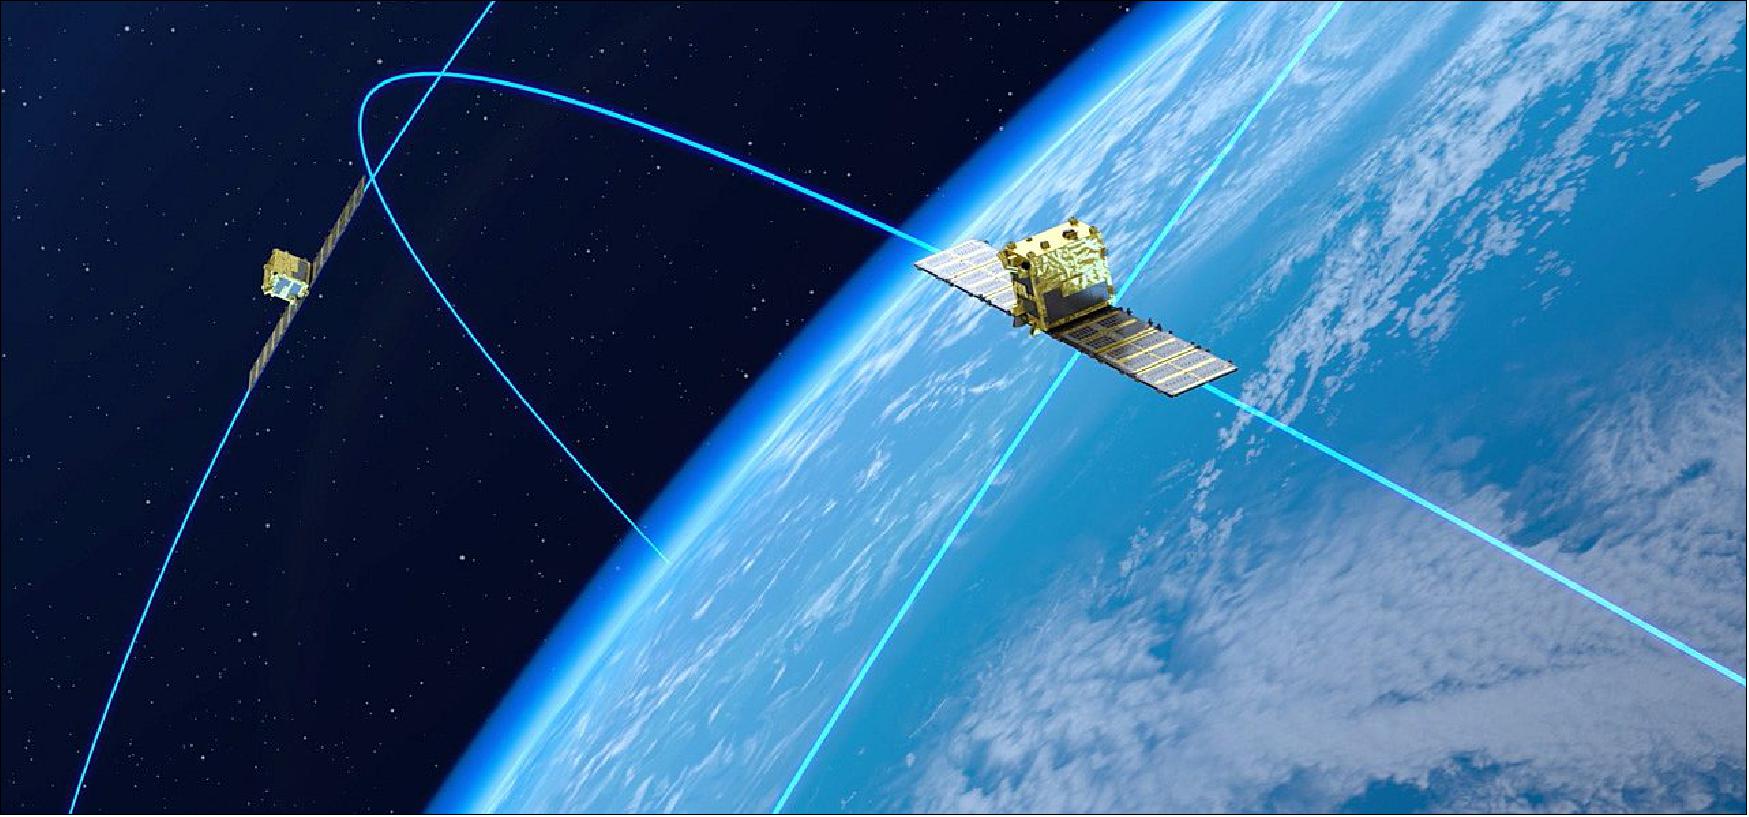 Figure 4: StriX-1 is the third satellite of a 30 SAR satellite constellation that Synspective is planning to deploy by the late 2020s. This LEO constellation will be capable of observing the location of a disaster occurring anywhere in the world within 2 hours (within 24 hours with the first 6 satellites built and deployed by 2023), image credit: Synspective